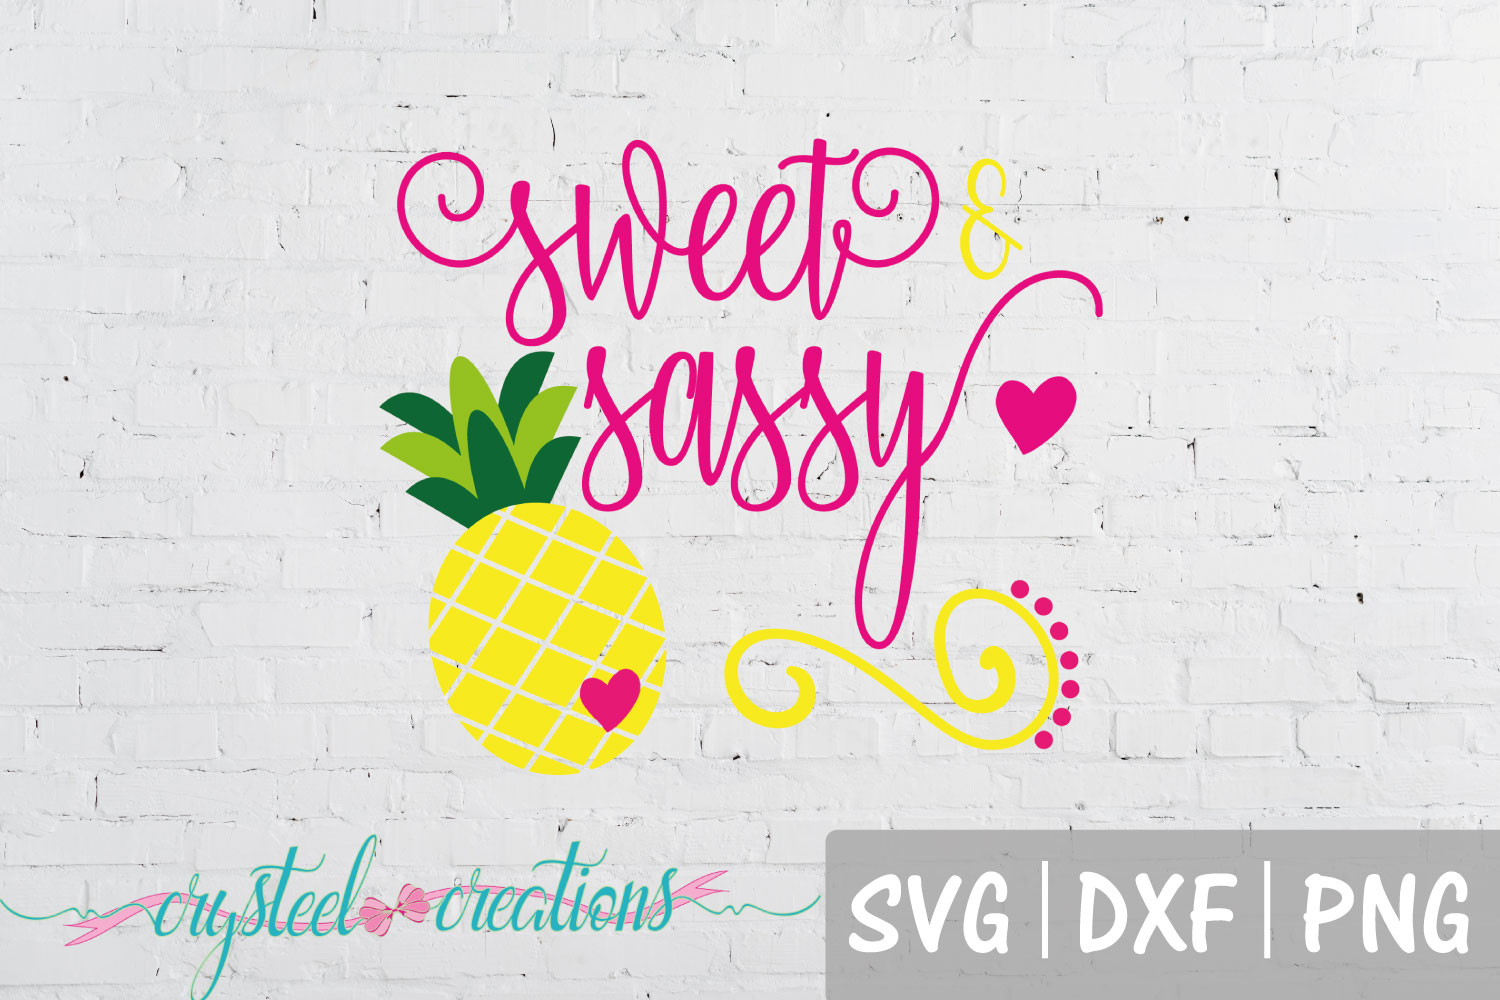 Sweet and Sassy SVG, DXF, PNG (101532) | Cut Files ...